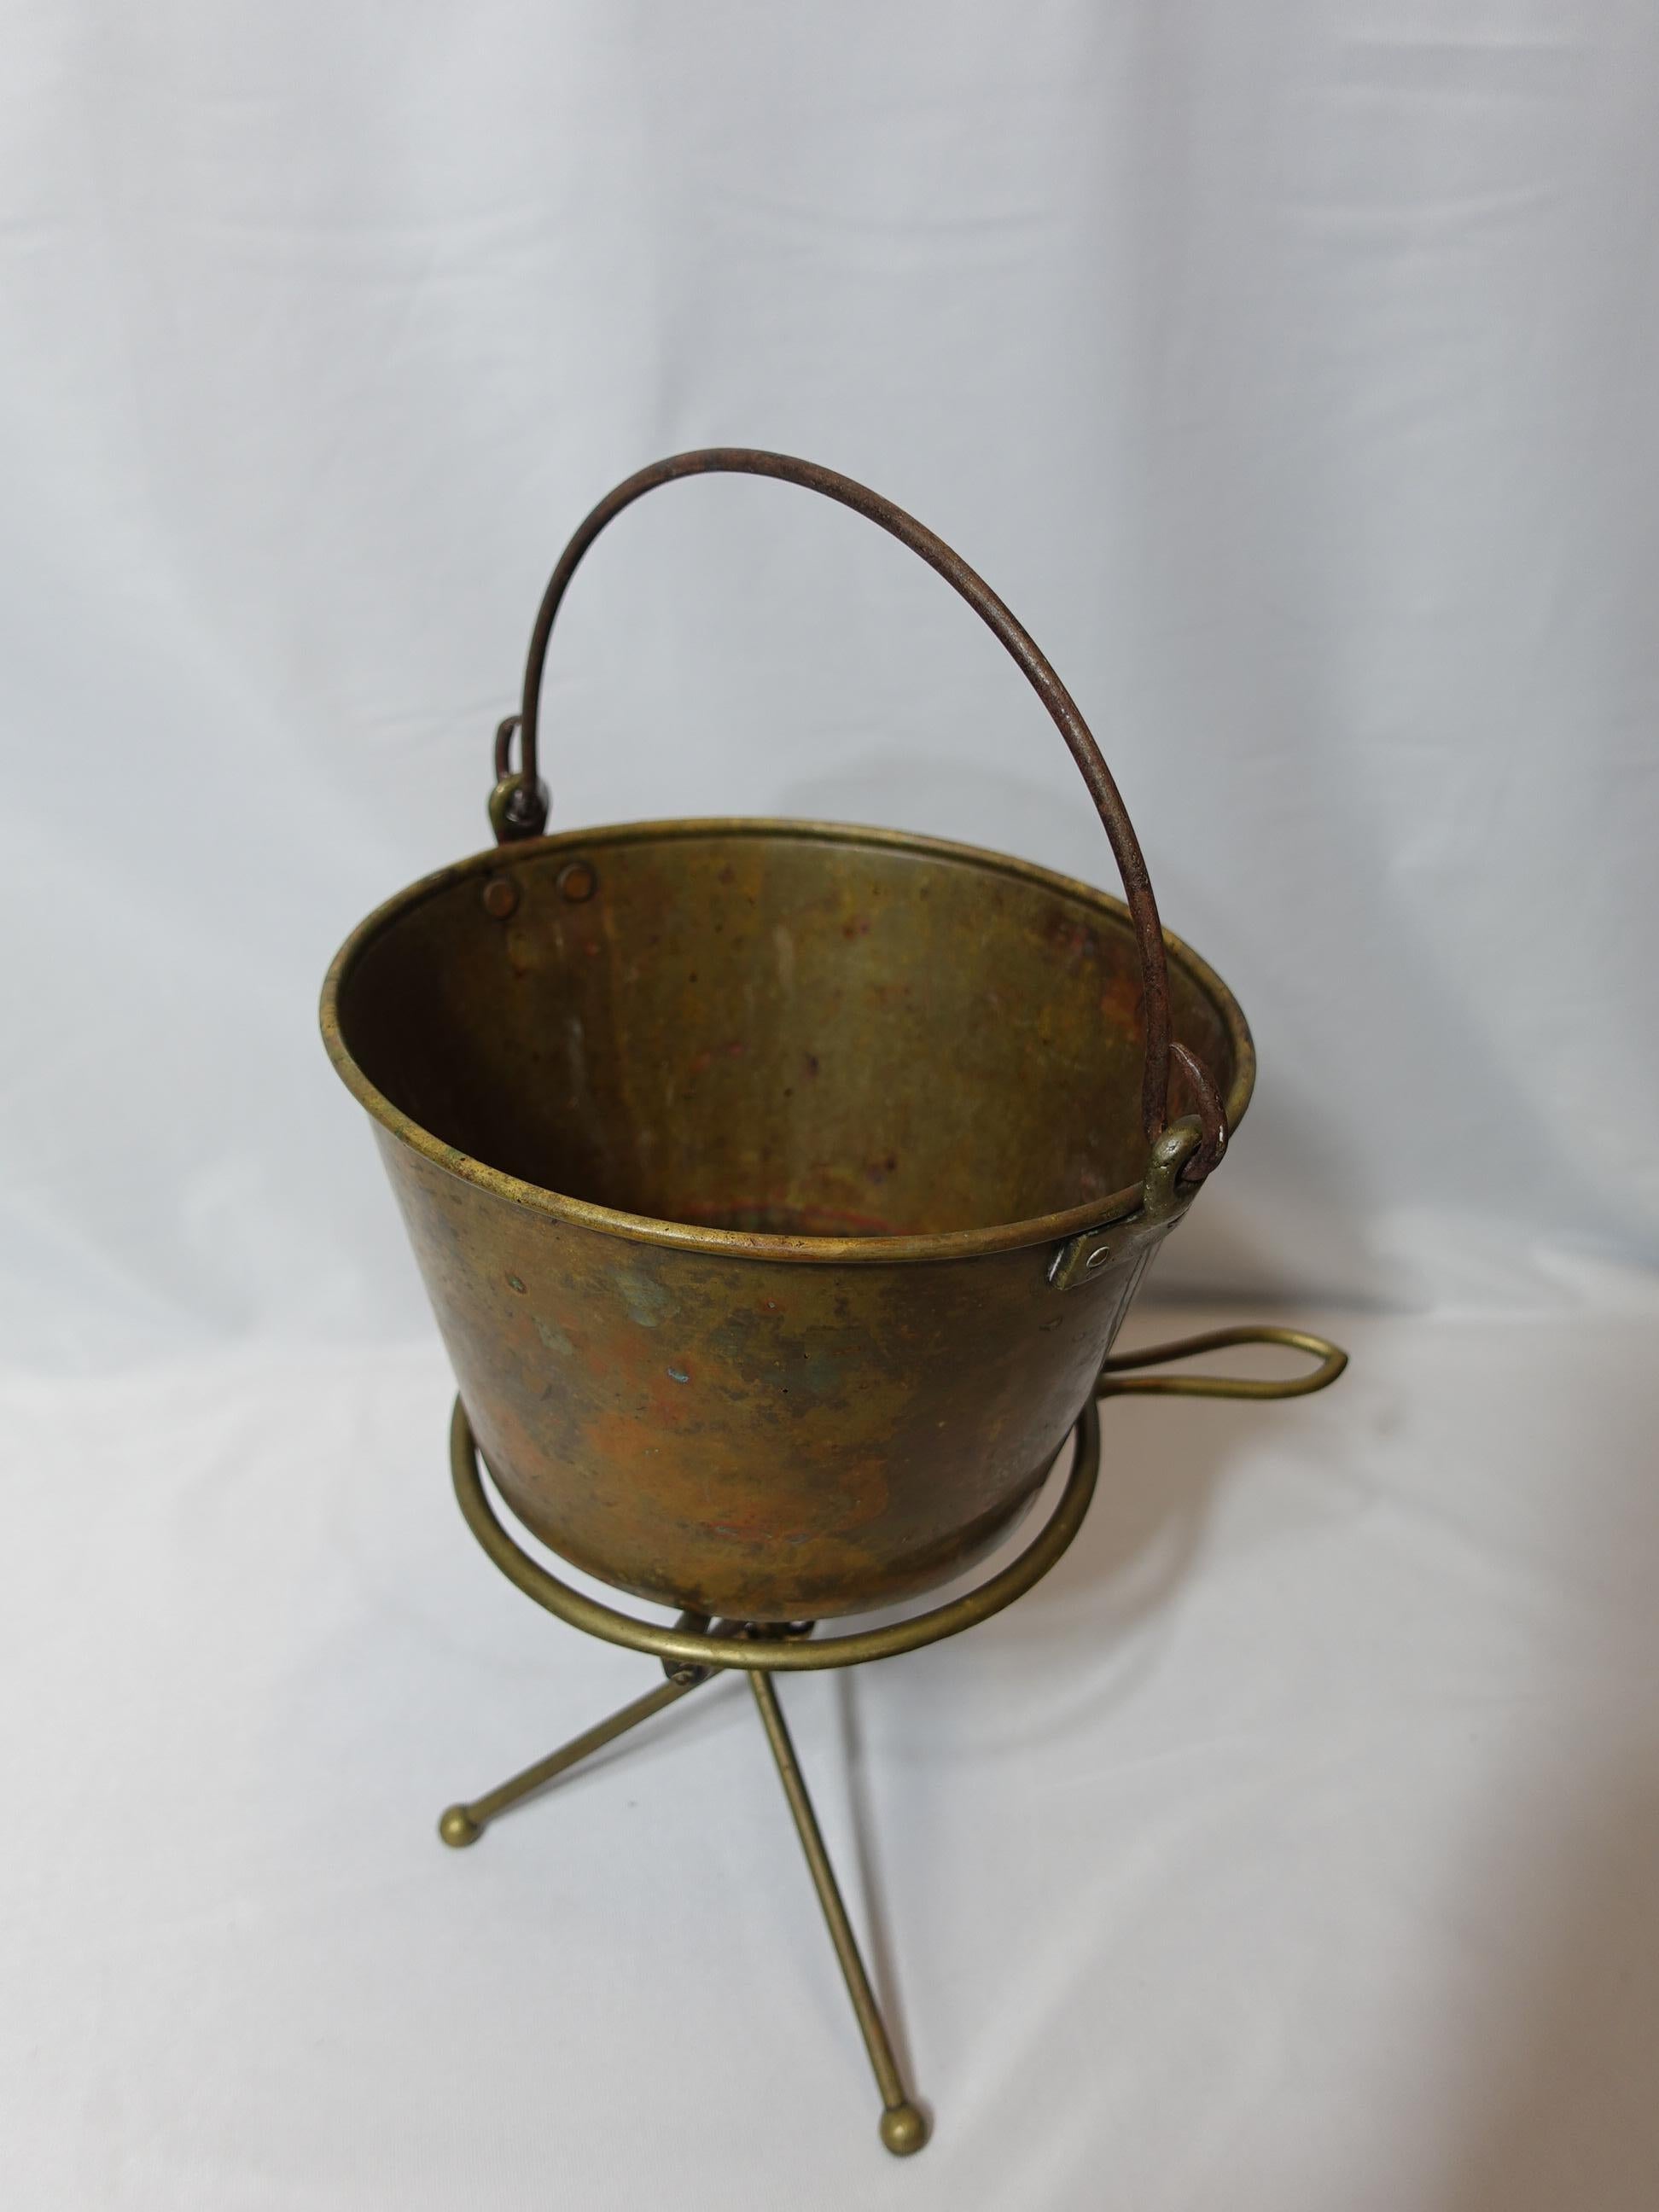 An 1851 Dec. 16, Hayden Pat. Ansonia Brass Co. Bail brass fireplace bucket or planter marked on the bottom and a Brass Reivet Stand.
The Bucket is 19